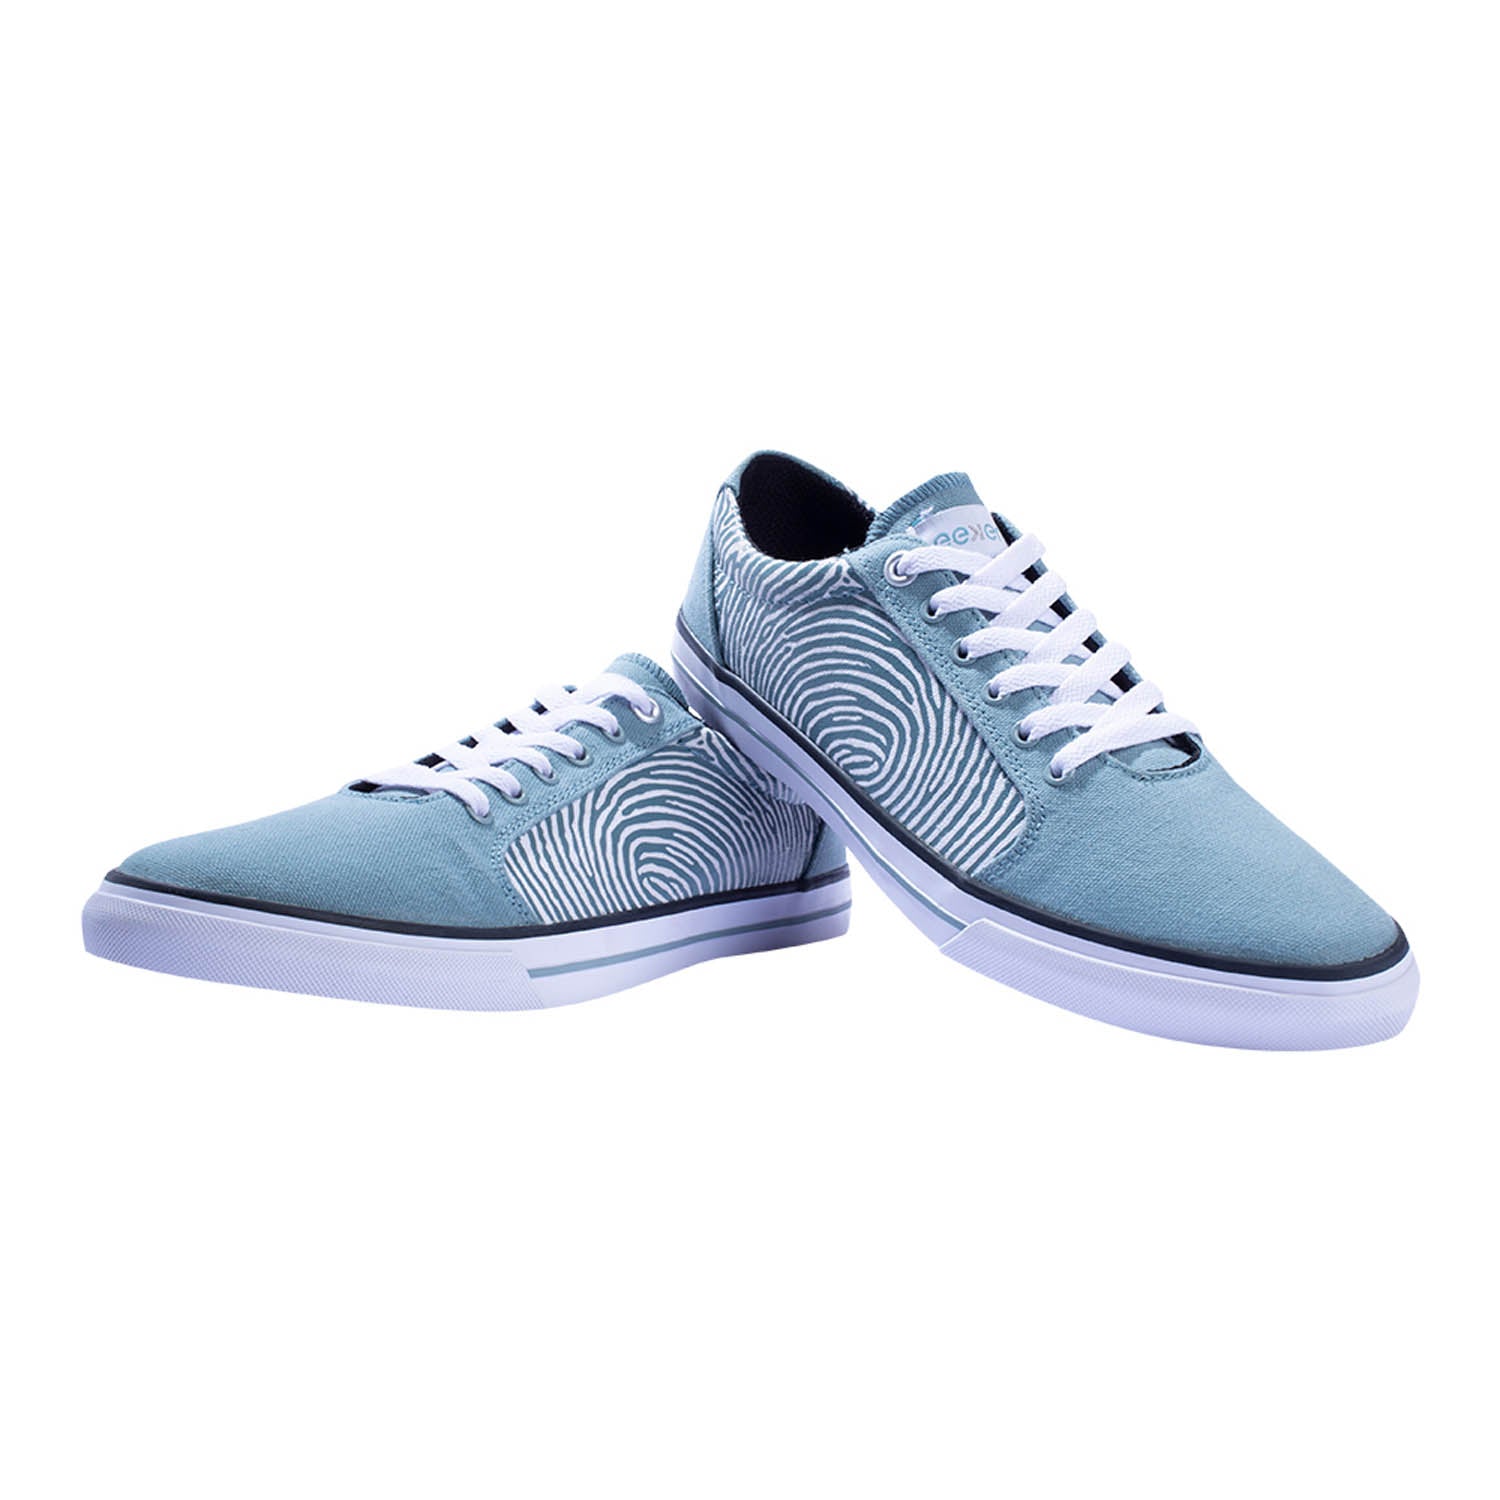 Eeken Hoodster From The House Of Paragon Canvas Shoes For Men